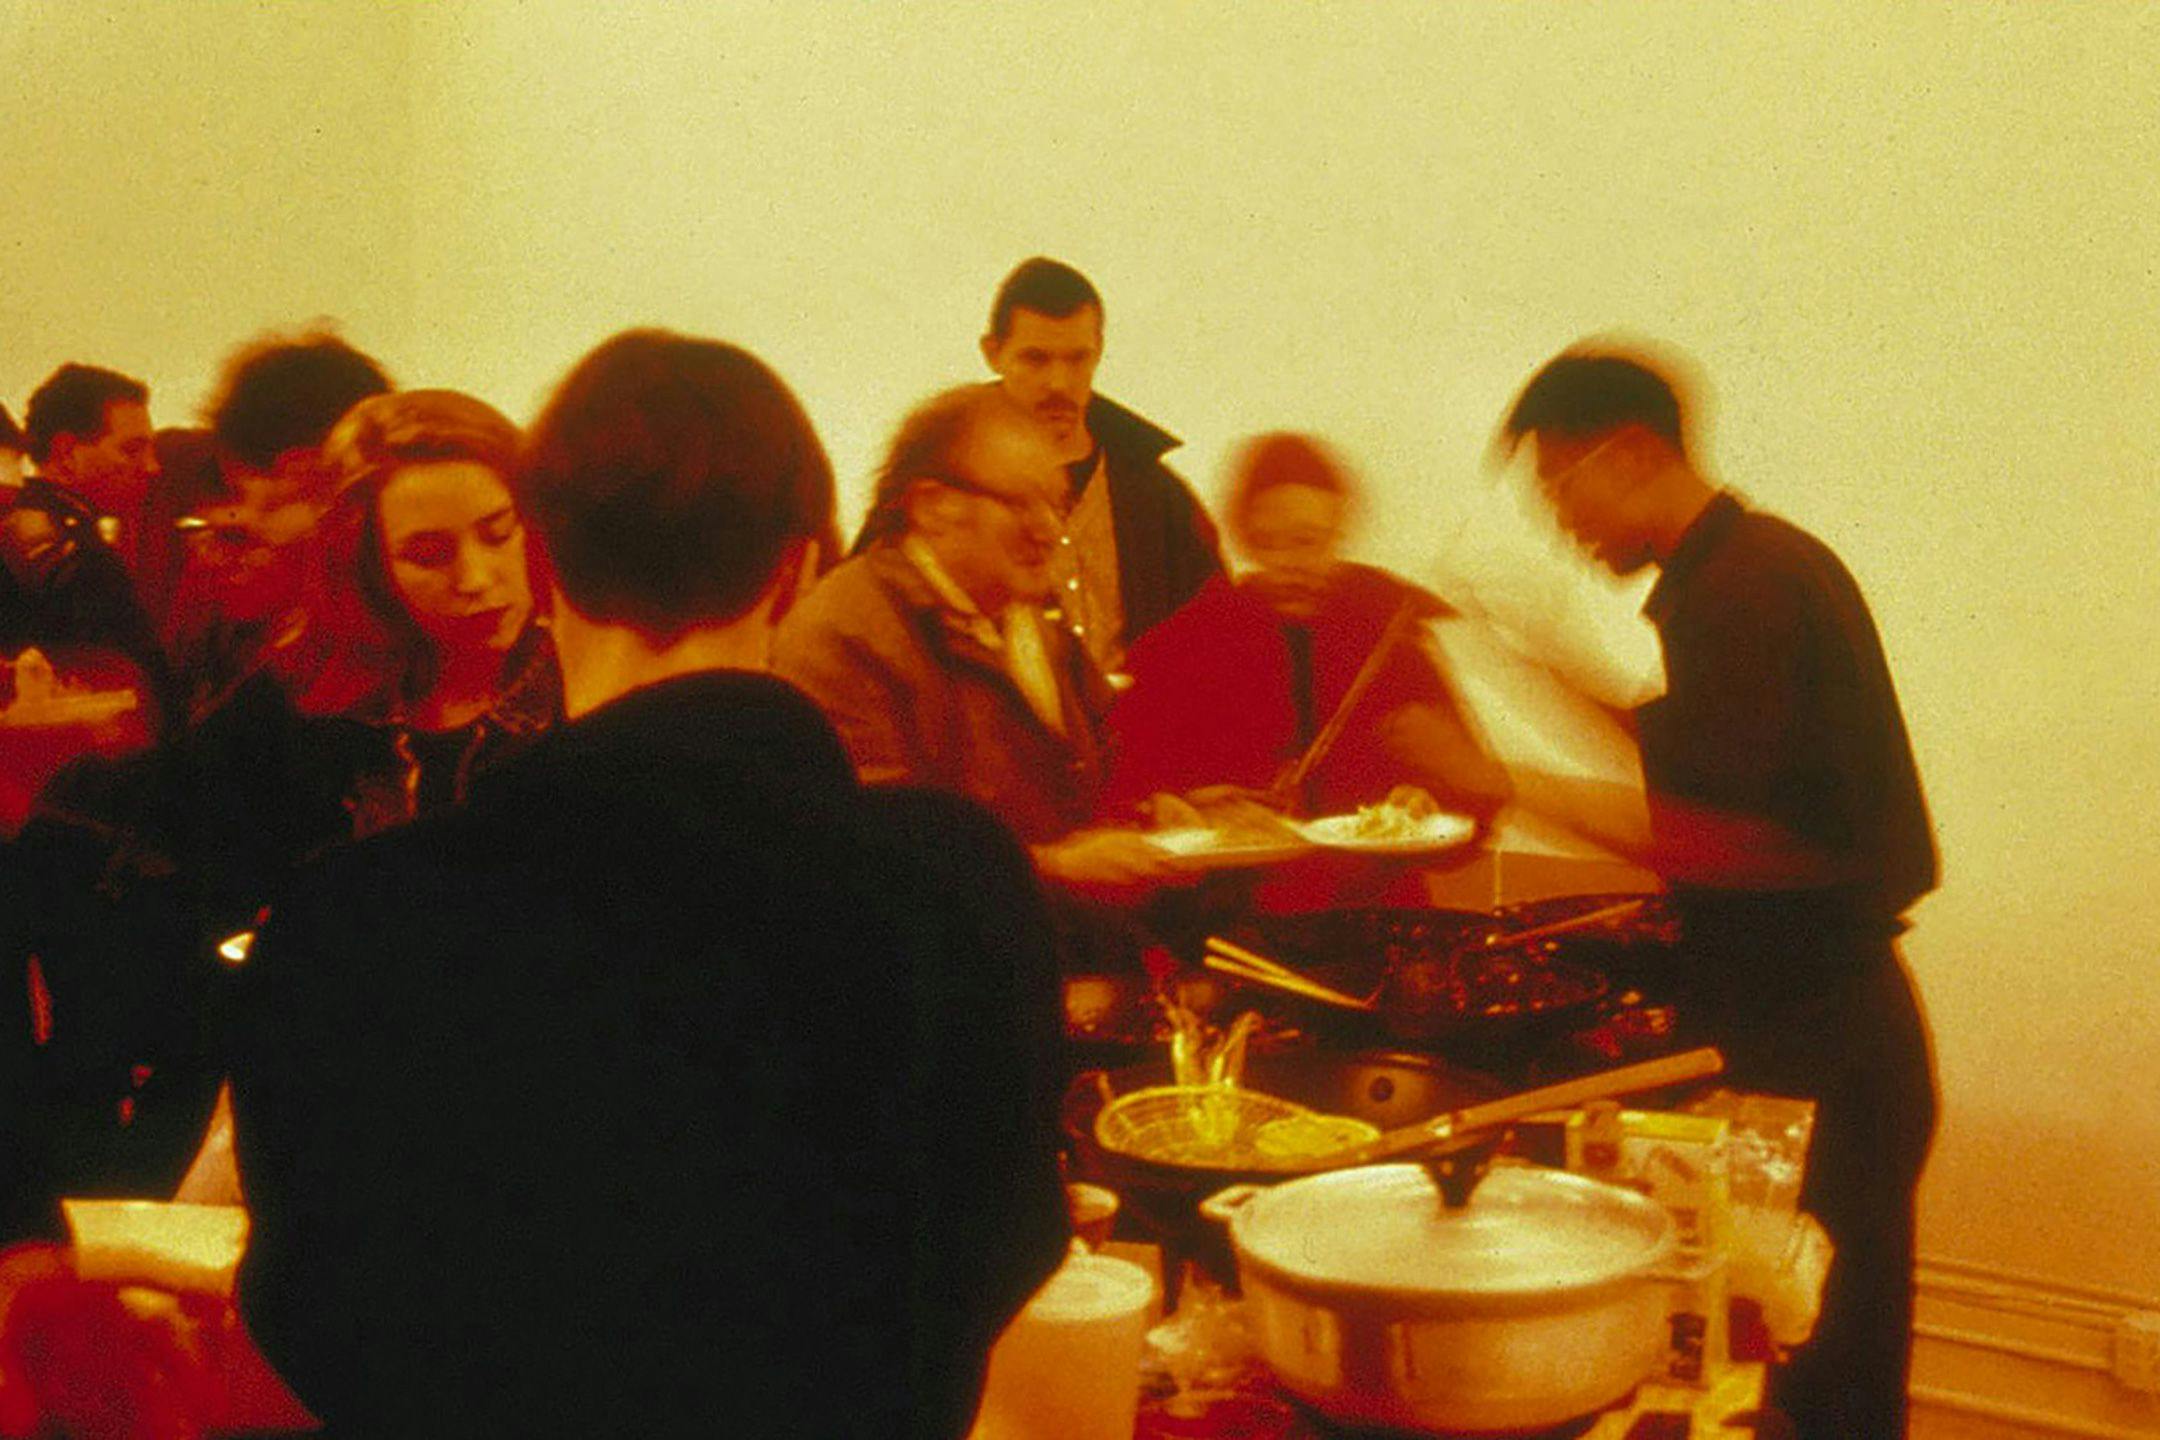 An installation view of viewers interacting with a mixed media installation by Rirkrit Tiravinija, titled untitled (pad thai), dated 1990.